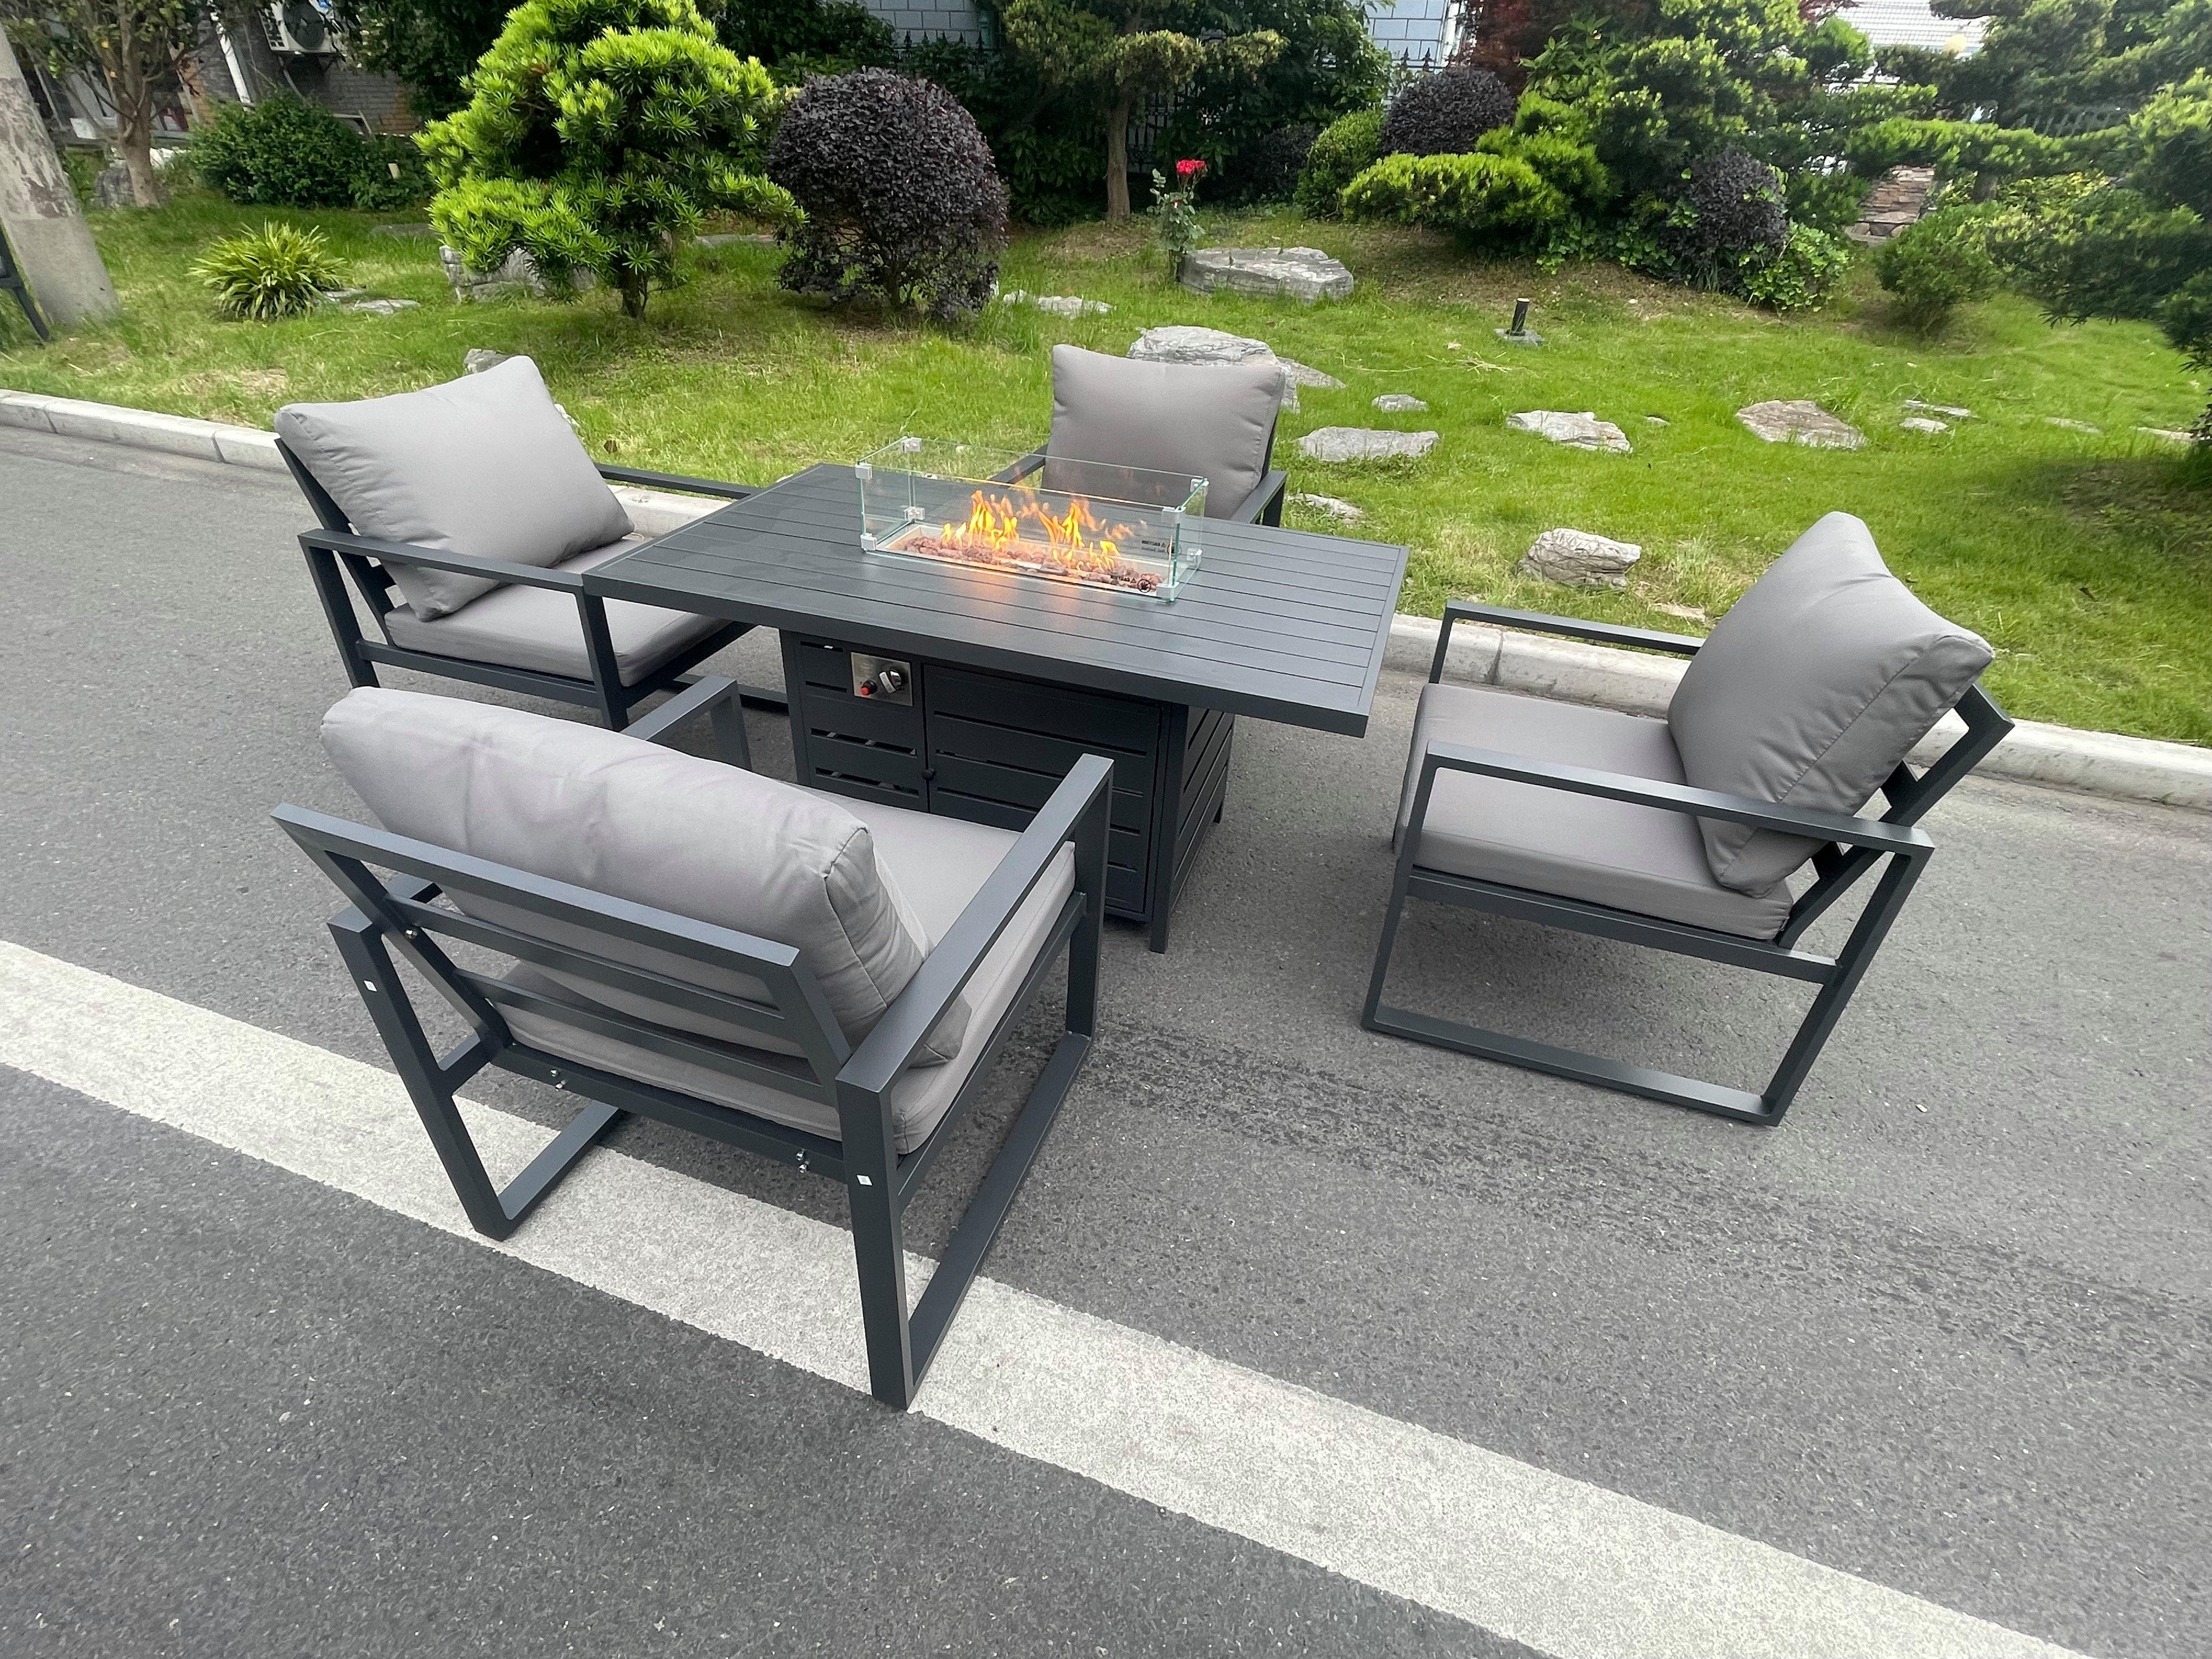 Aluminum Top 4 Seat Garden Furniture Dining Set Gas Fire Pit Table And Chairs Burner Heater Patio Ou